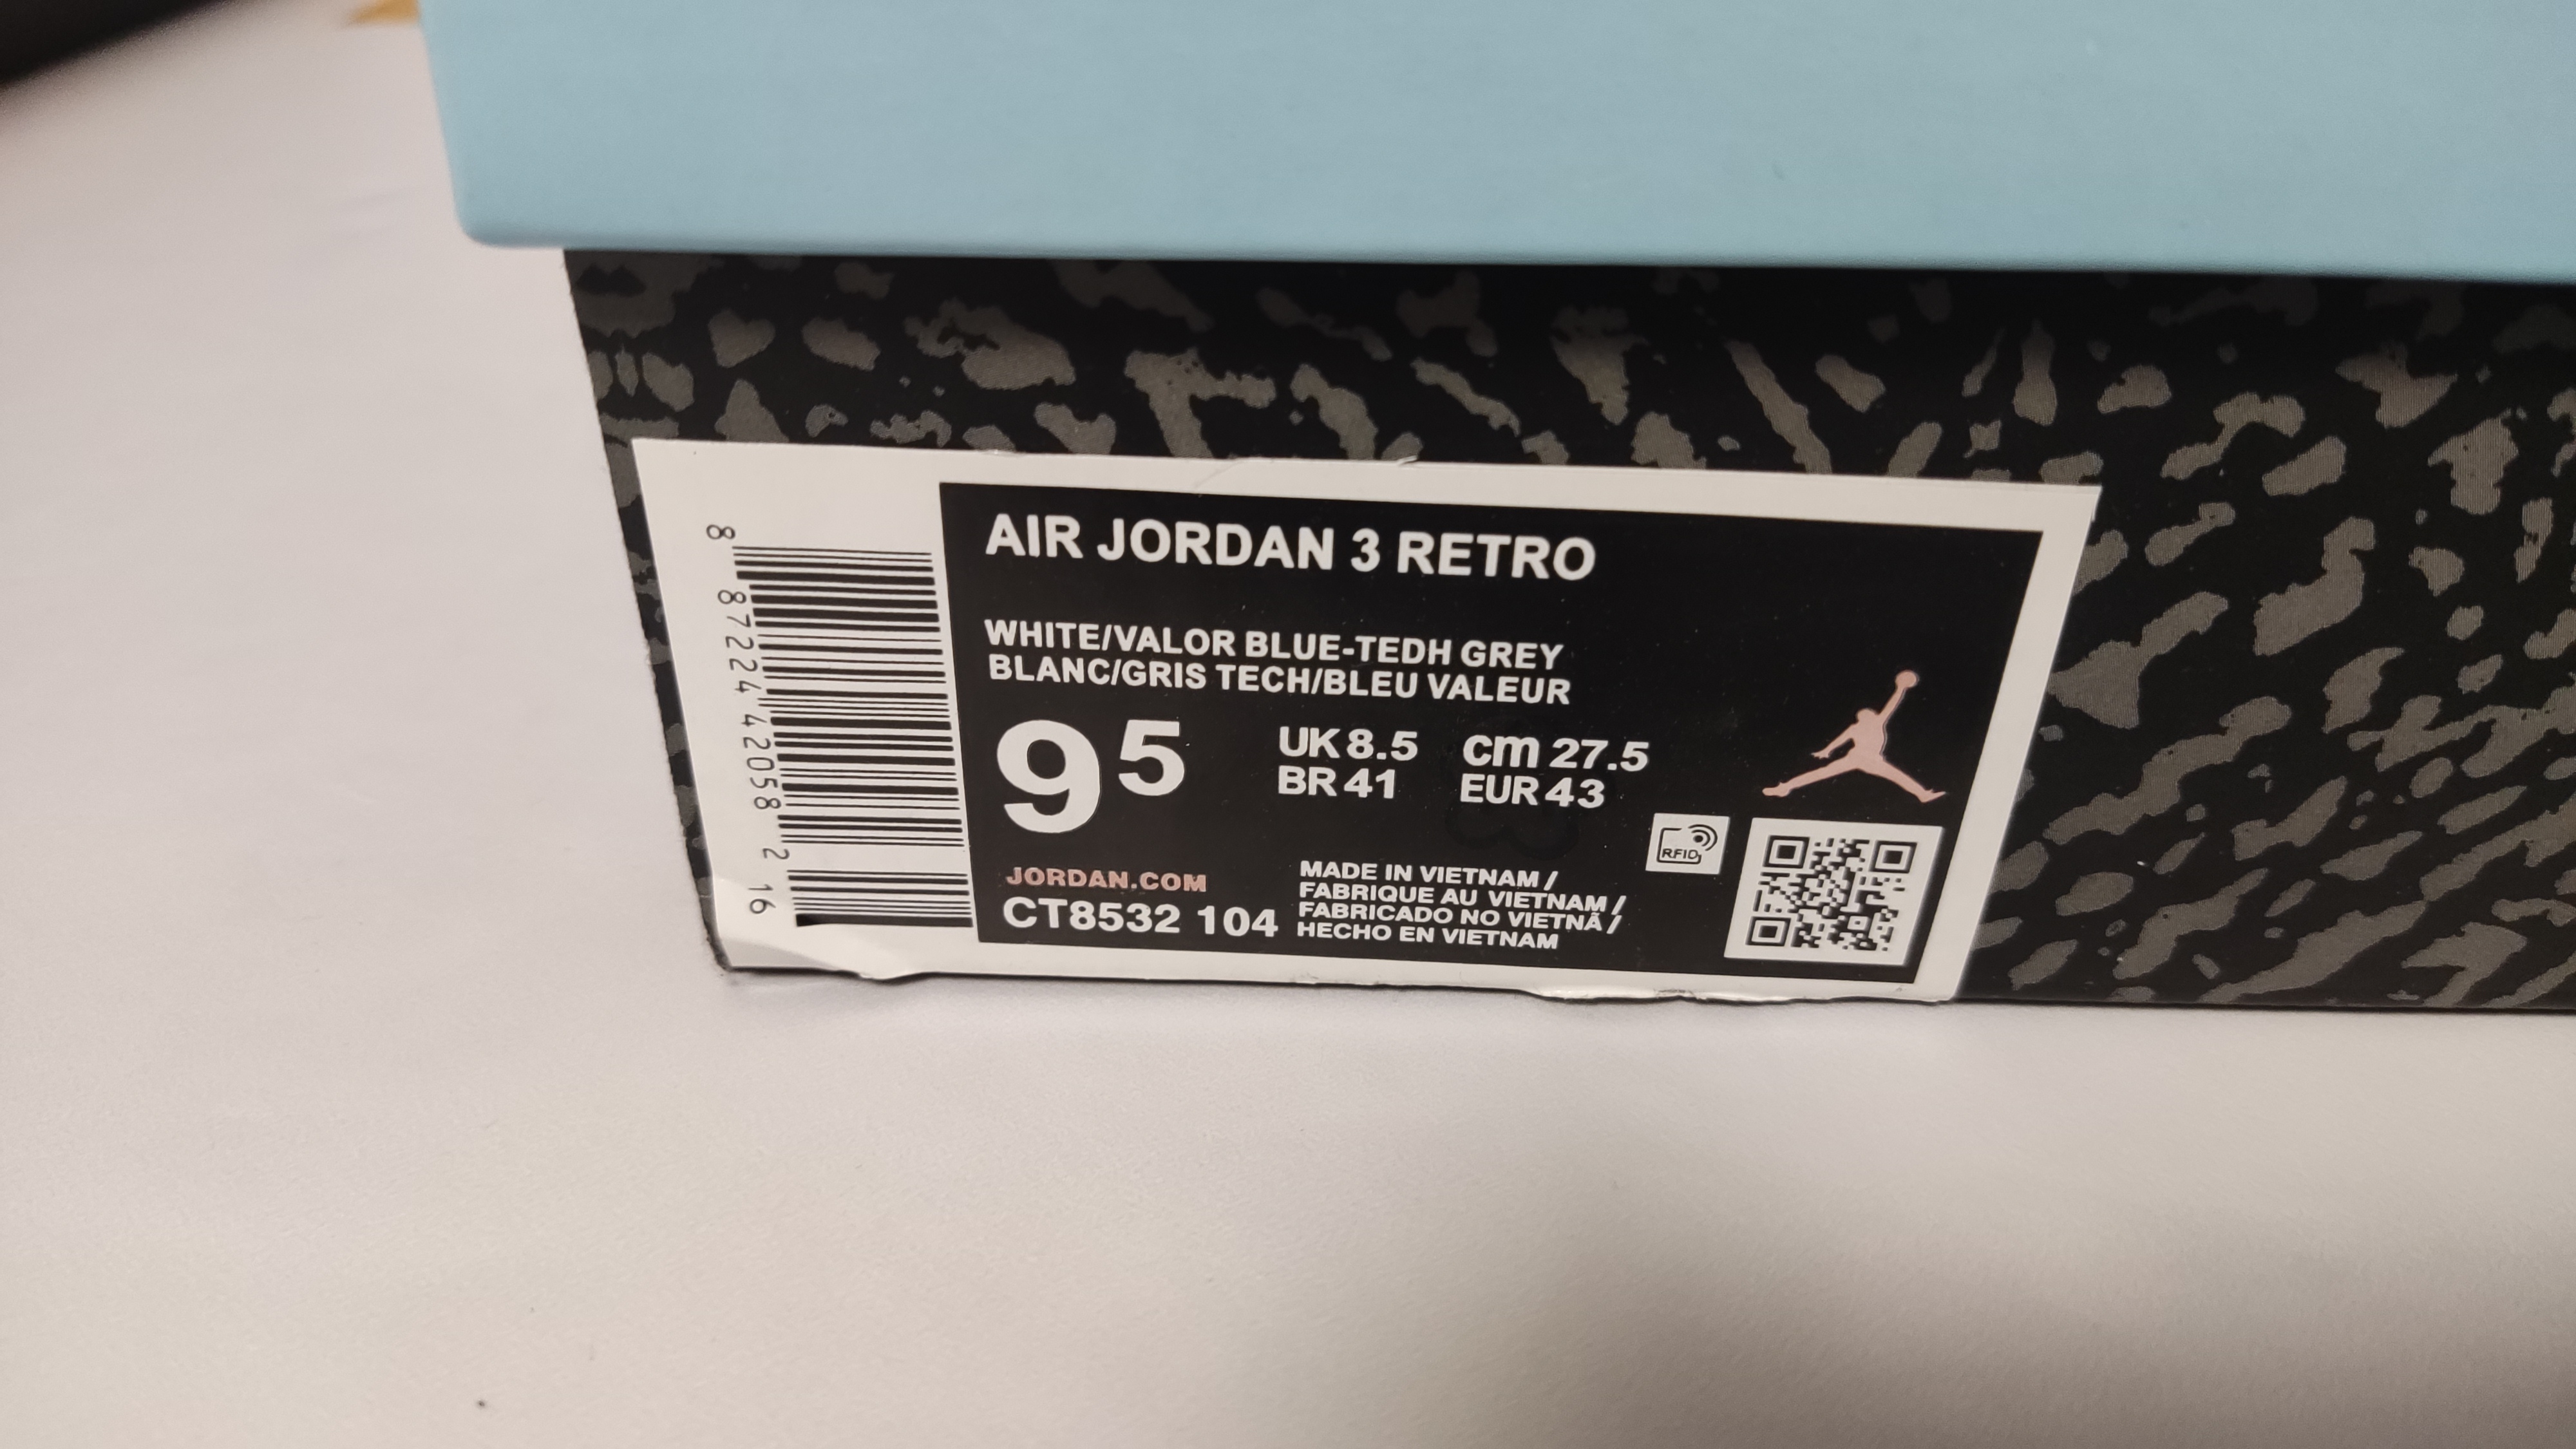 Quality Check Picture Replica Jordan 3 Retro UNC From Jdfoot